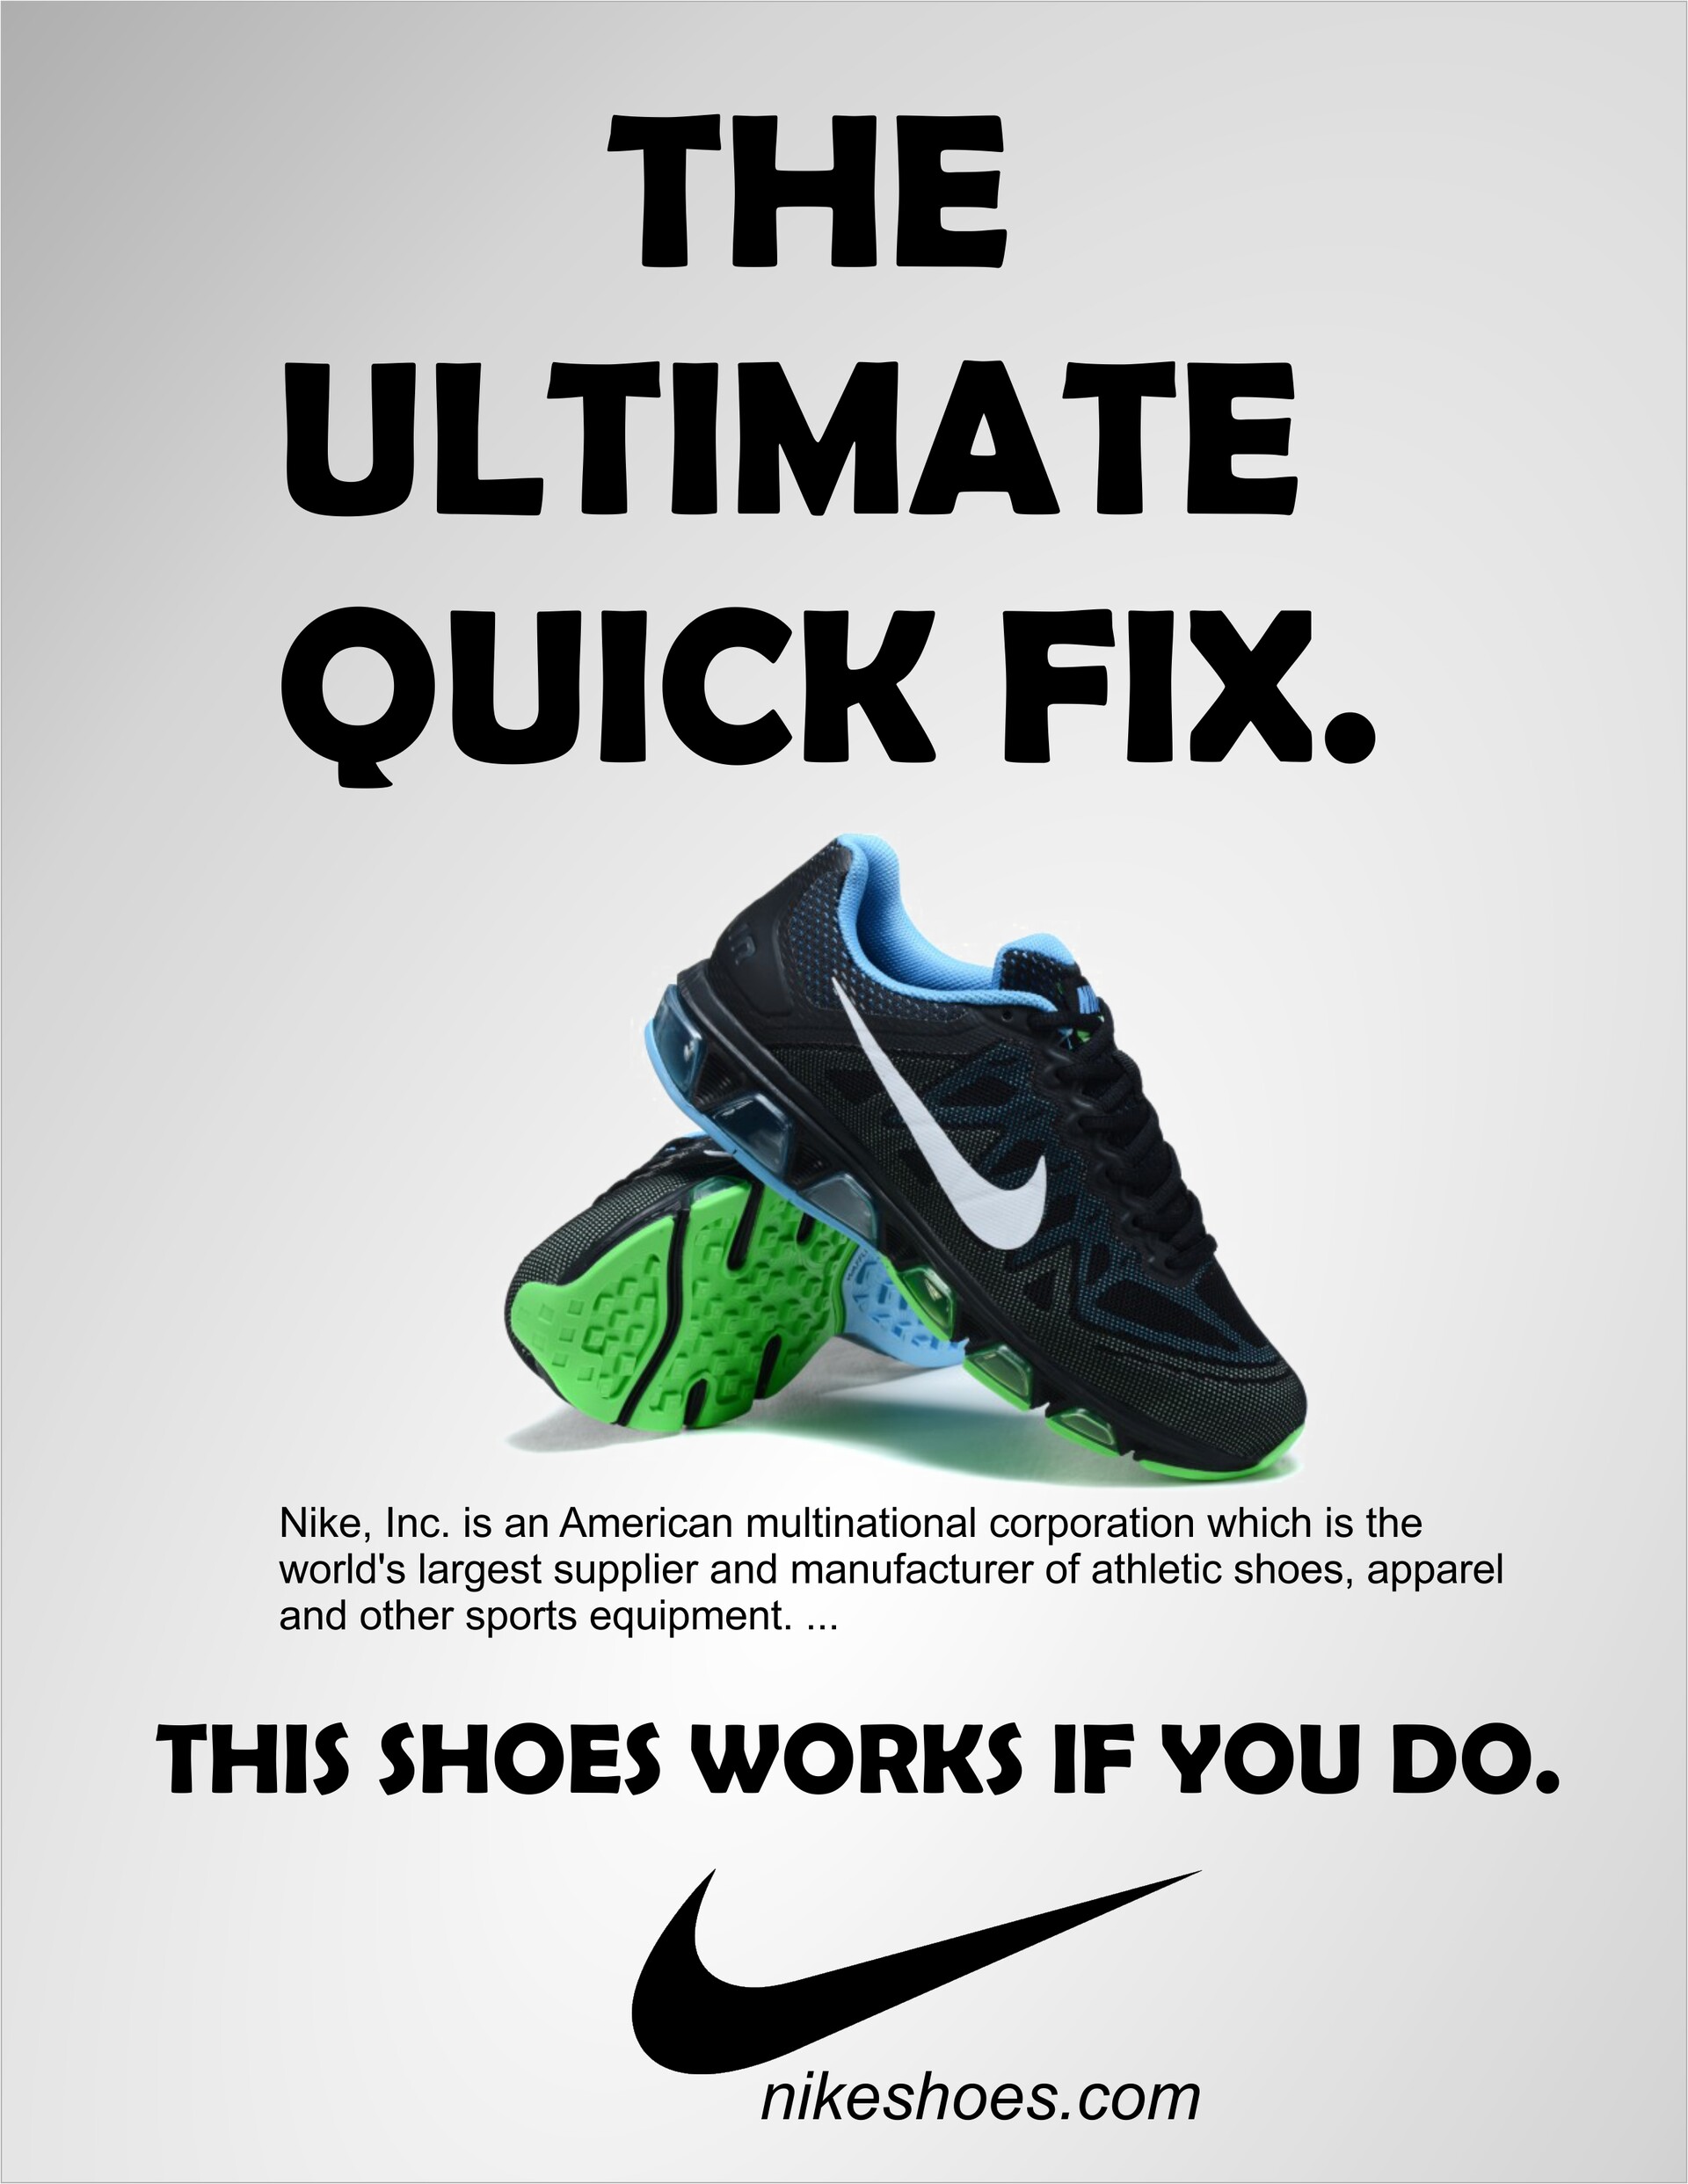 nike ad shoes